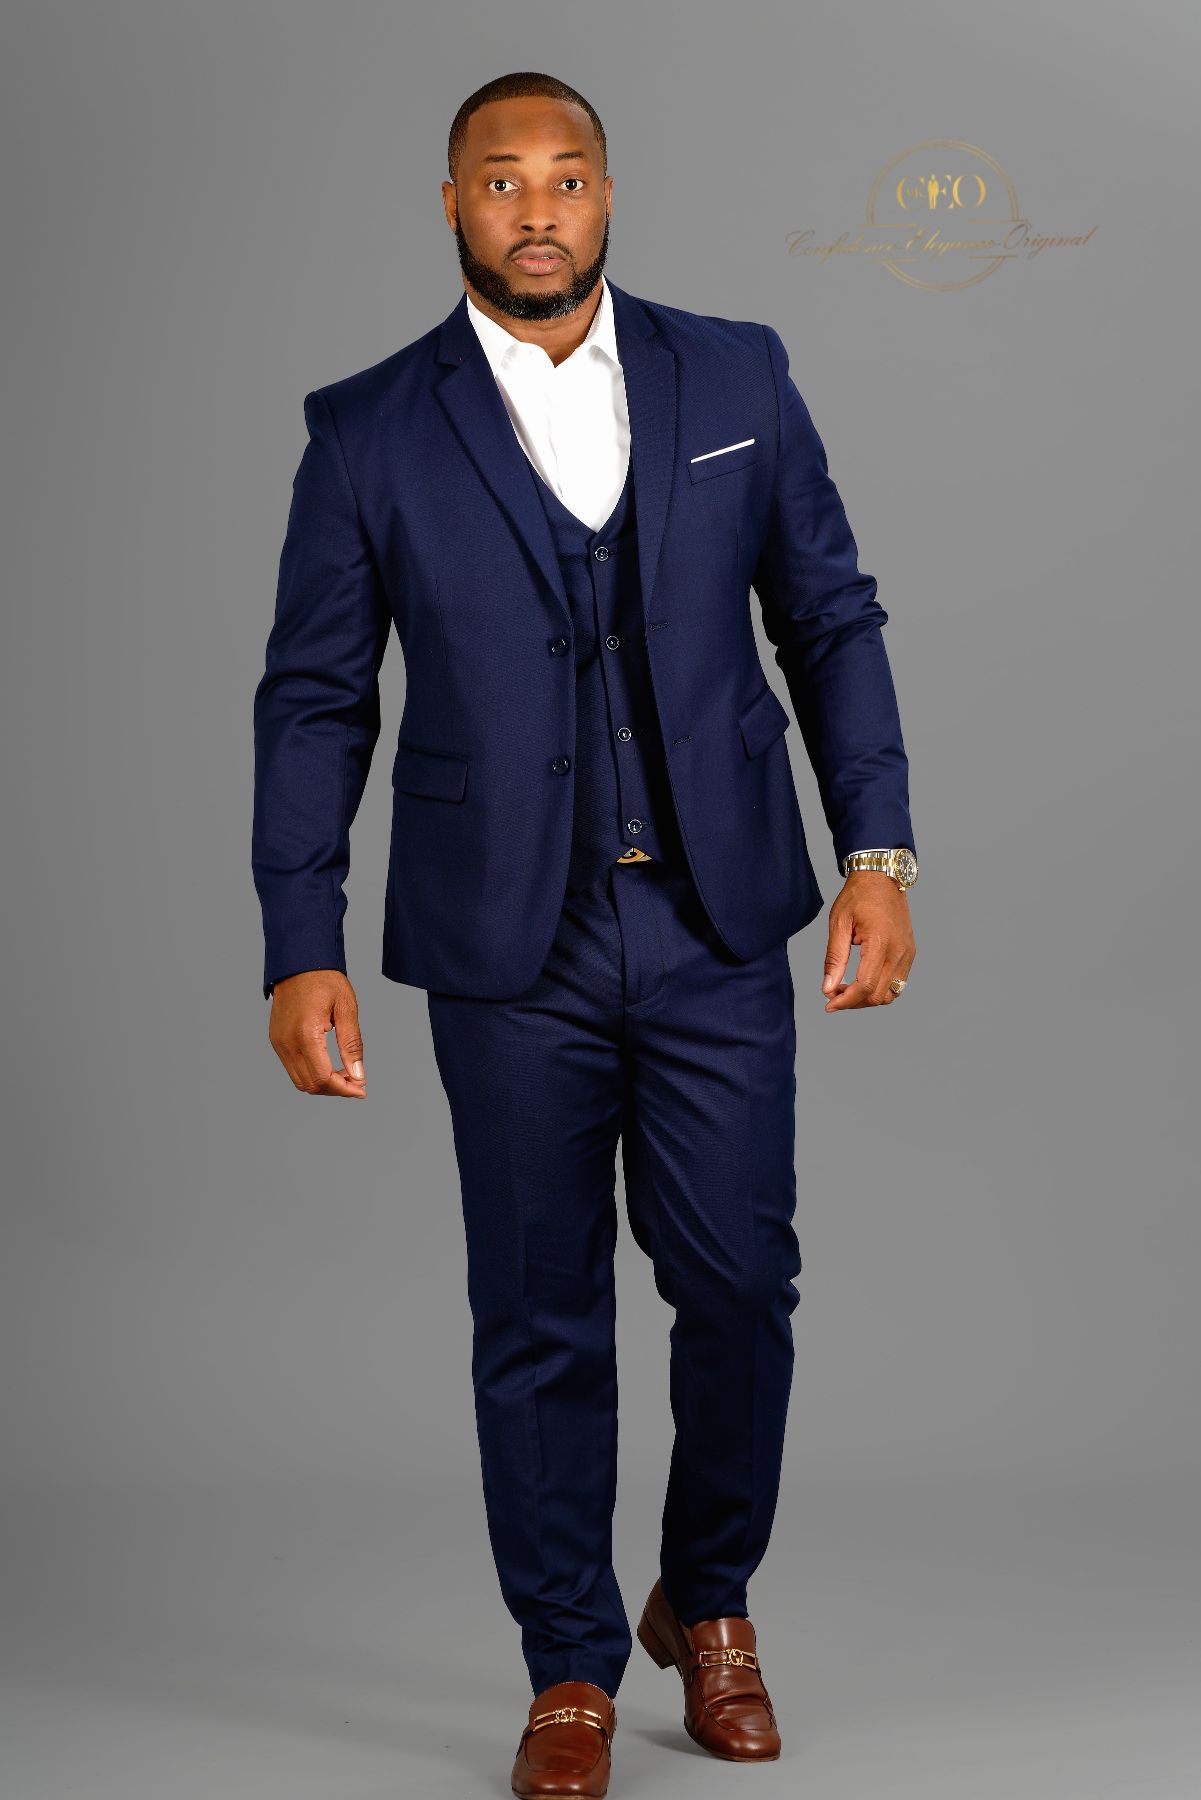 Men's Suits Classic Fit - 3 Piece Suit Men with Single Breasted Jacket,Vest  and Pant Sets for Wedding Prom Party Suit(Blue,S) at Amazon Men's Clothing  store